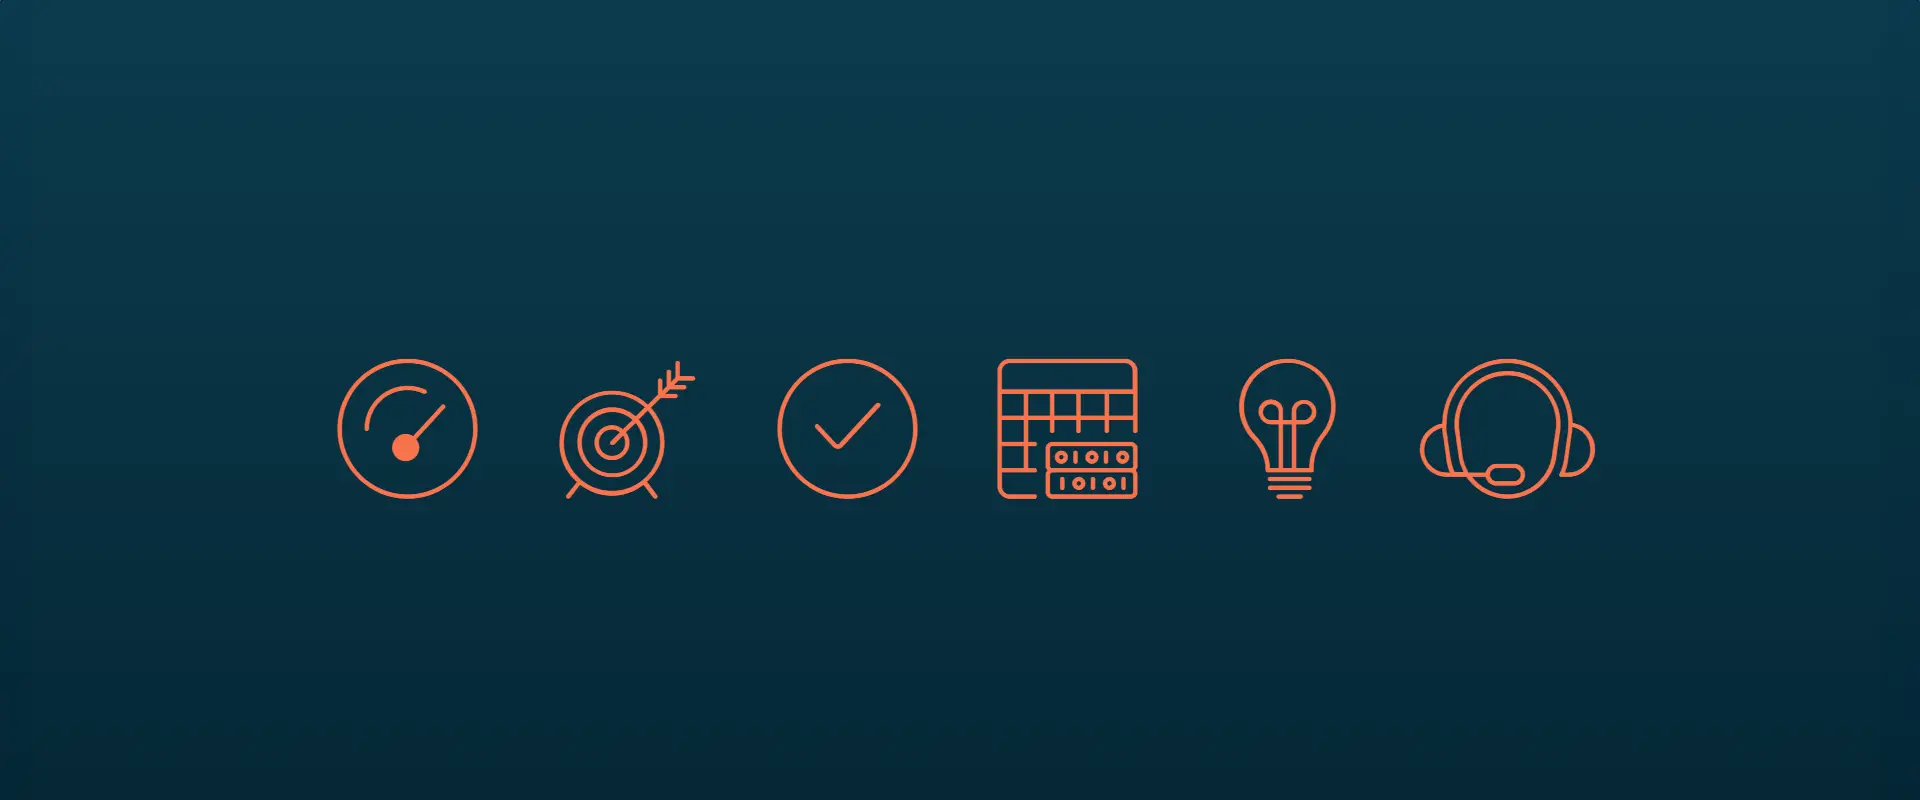 Icons depicting Speed, Accuracy, Reputation, Data Sources, Coverage, , Innovation and Customer Support